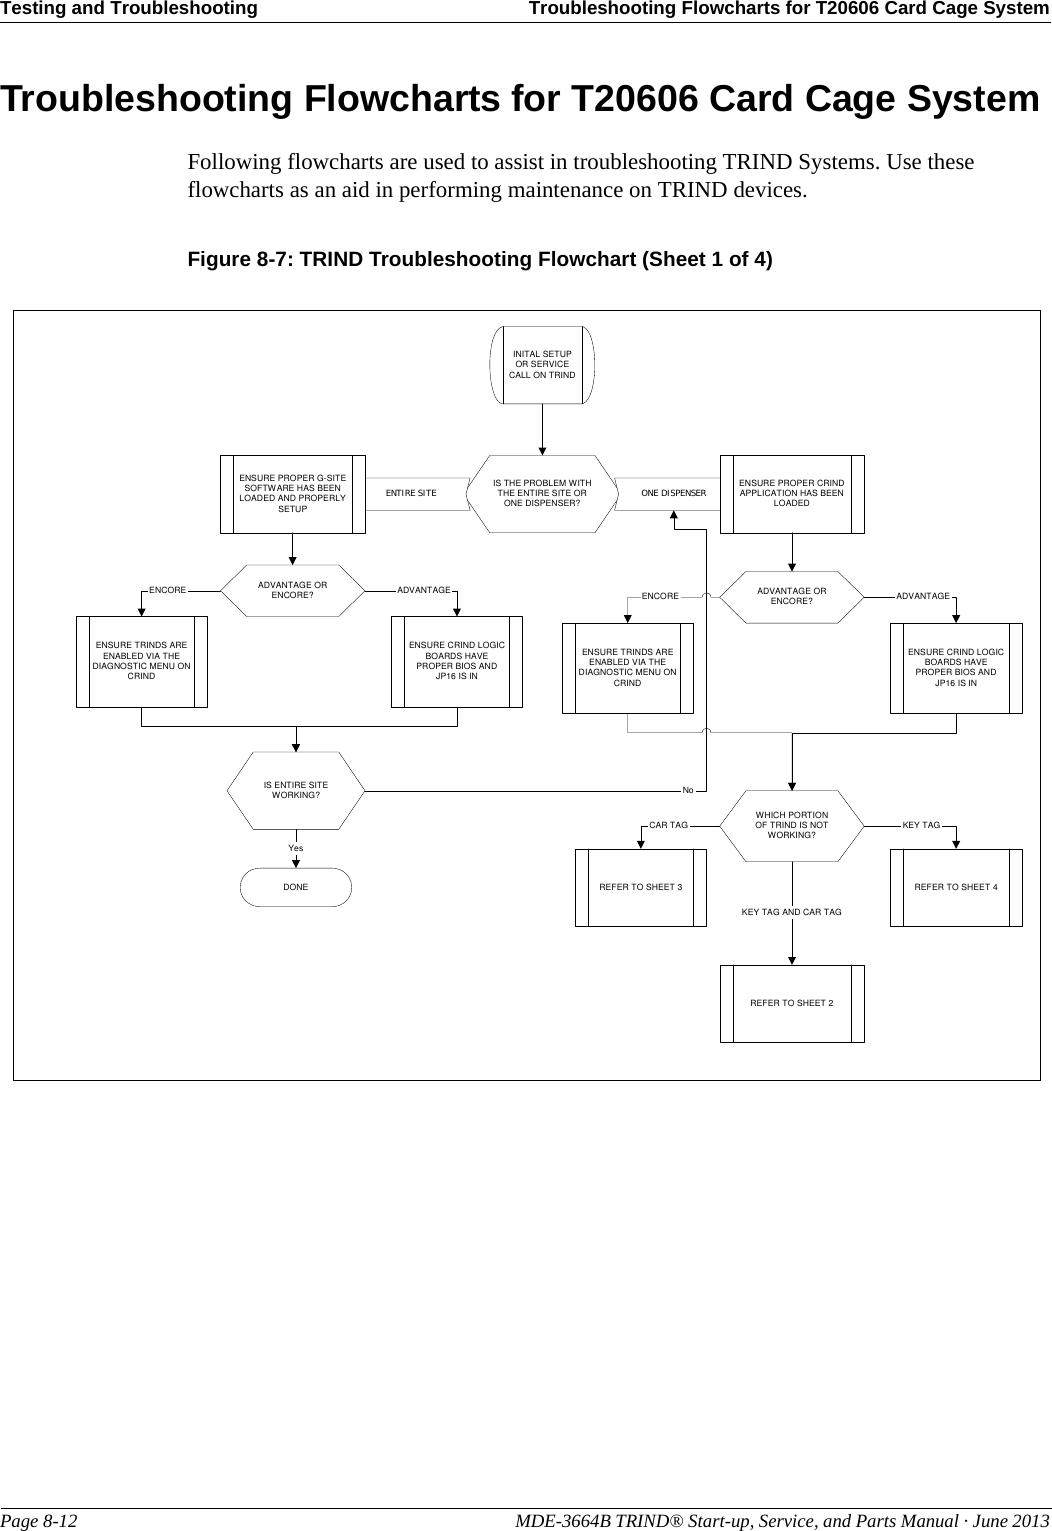 Testing and Troubleshooting Troubleshooting Flowcharts for T20606 Card Cage SystemPage 8-12                                                                                                  MDE-3664B TRIND® Start-up, Service, and Parts Manual · June 2013Troubleshooting Flowcharts for T20606 Card Cage SystemFollowing flowcharts are used to assist in troubleshooting TRIND Systems. Use these flowcharts as an aid in performing maintenance on TRIND devices.Figure 8-7: TRIND Troubleshooting Flowchart (Sheet 1 of 4)INITAL SETUPOR SERVICECALL ON TRINDIS THE PROBLEM WITHTHE ENTIRE SITE ORONE DISPENSER?ENTIRE SITE ONE DISPENSERADVANTAGE ORENCORE?ENSURE CRIND LOGICBOARDS HAVEPROPER BIOS ANDJP16 IS INENSURE TRINDS AREENABLED VIA THEDIAGNOSTIC MENU ONCRINDENSURE PROPER G-SITESOFTWARE HAS BEENLOADED AND PROPERLYSETUPENCORE ADVANTAGE ADVANTAGE ORENCORE?ENSURE CRIND LOGICBOARDS HAVEPROPER BIOS ANDJP16 IS INENSURE TRINDS AREENABLED VIA THEDIAGNOSTIC MENU ONCRINDENCORE ADVANTAGEWHICH PORTIONOF TRIND IS NOTWORKING?IS ENTIRE SITEWORKING? NoYesDONEENSURE PROPER CRINDAPPLICATION HAS BEENLOADEDKEY TAG AND CAR TAGREFER TO SHEET 3REFER TO SHEET 2REFER TO SHEET 4KEY TAGCAR TAG